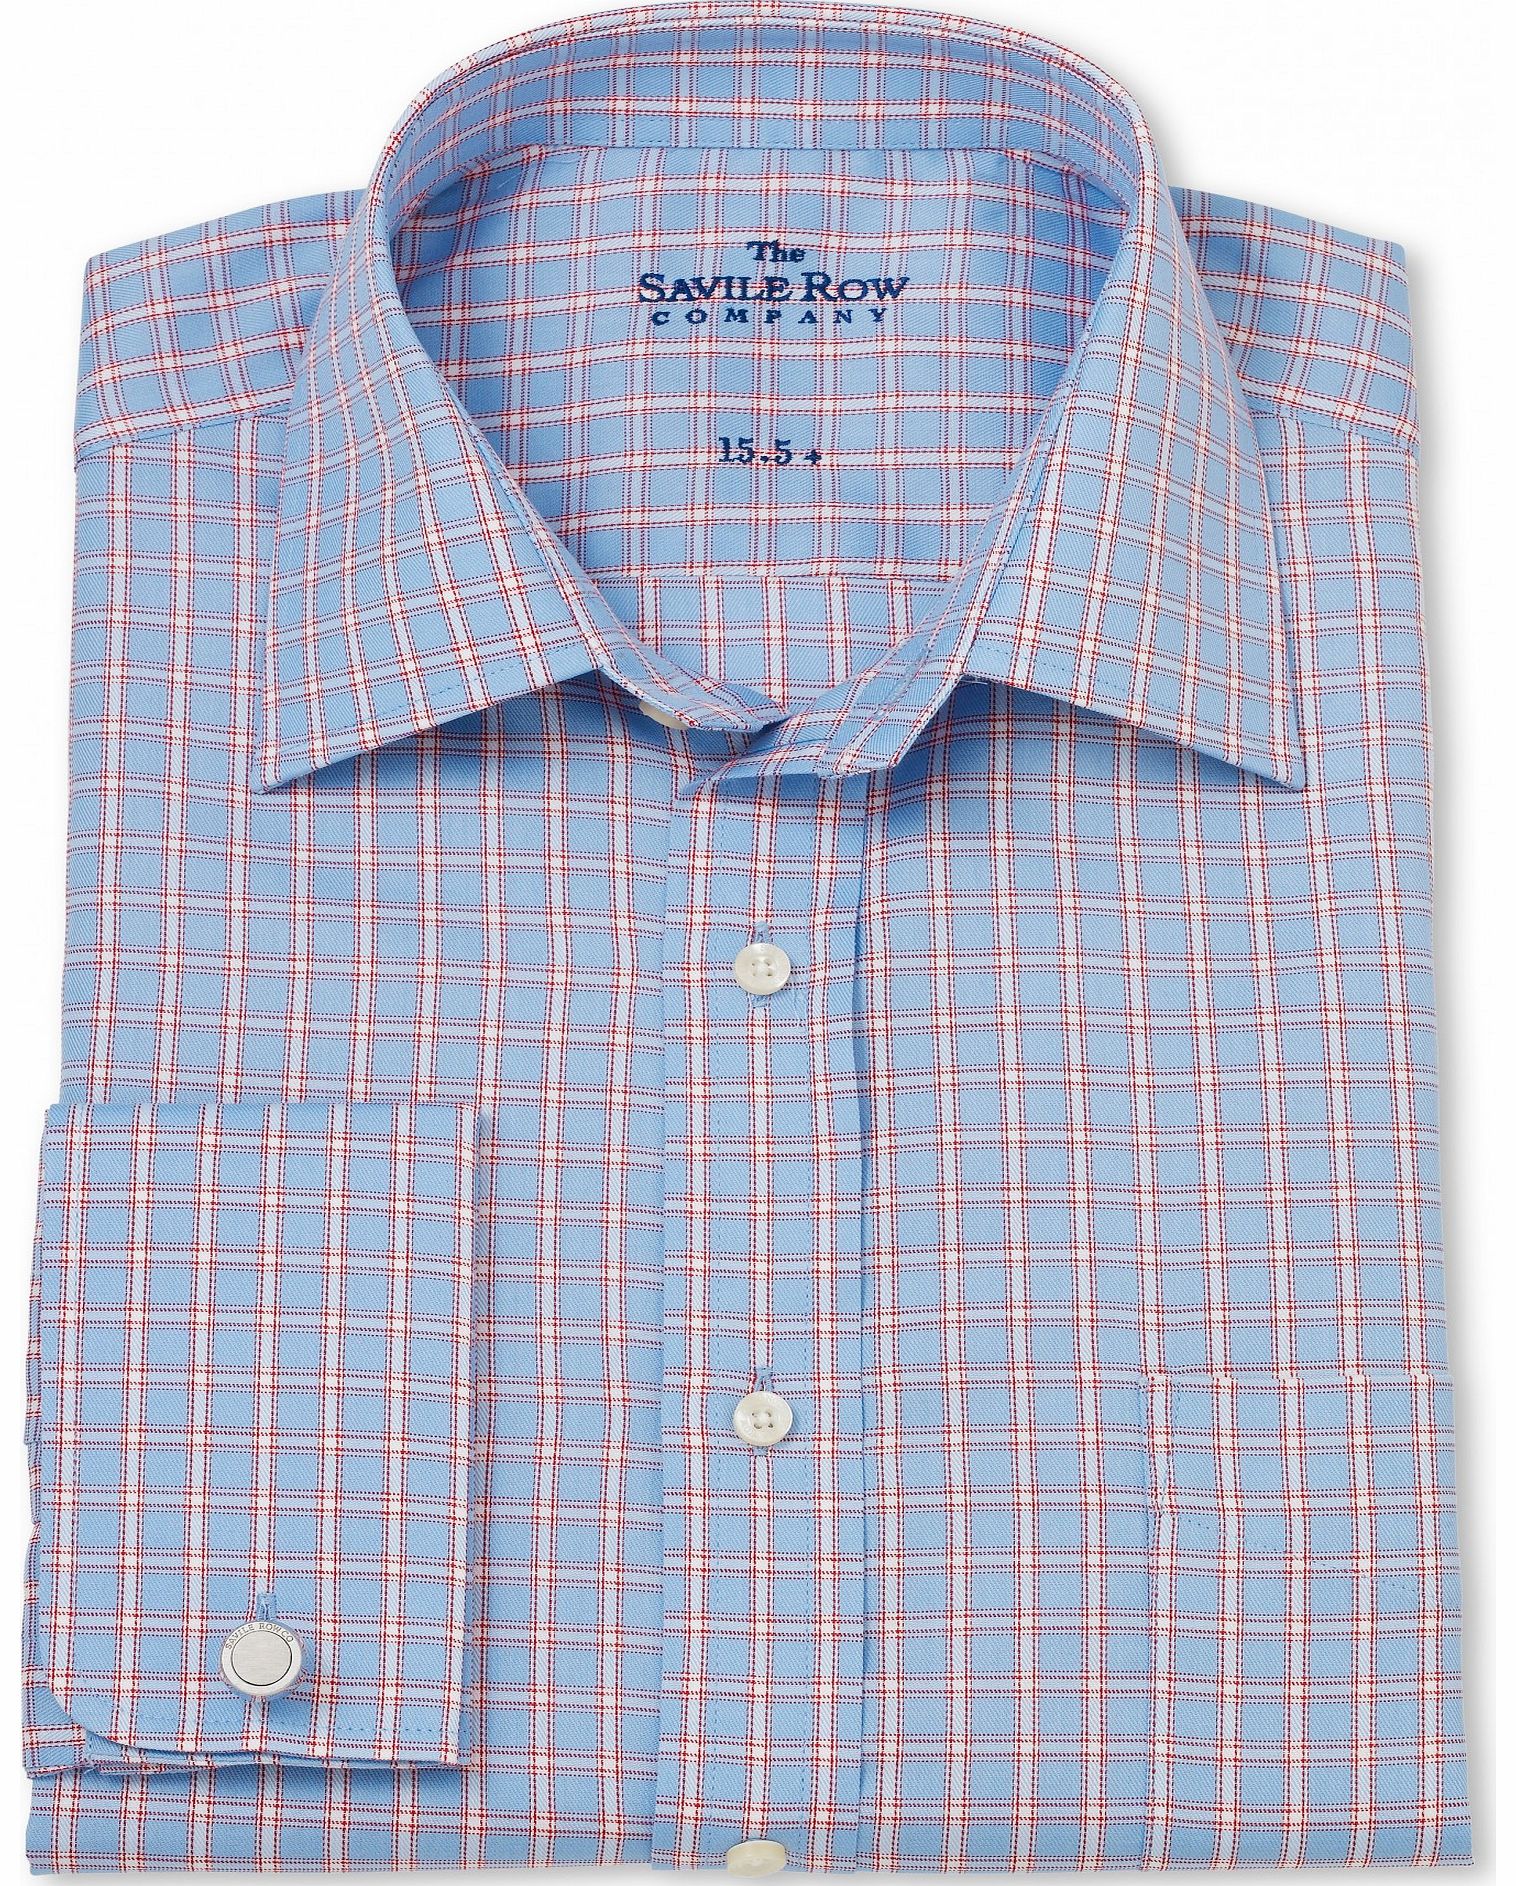 Savile Row Company Blue Red White Grid Check Classic Fit Shirt 15